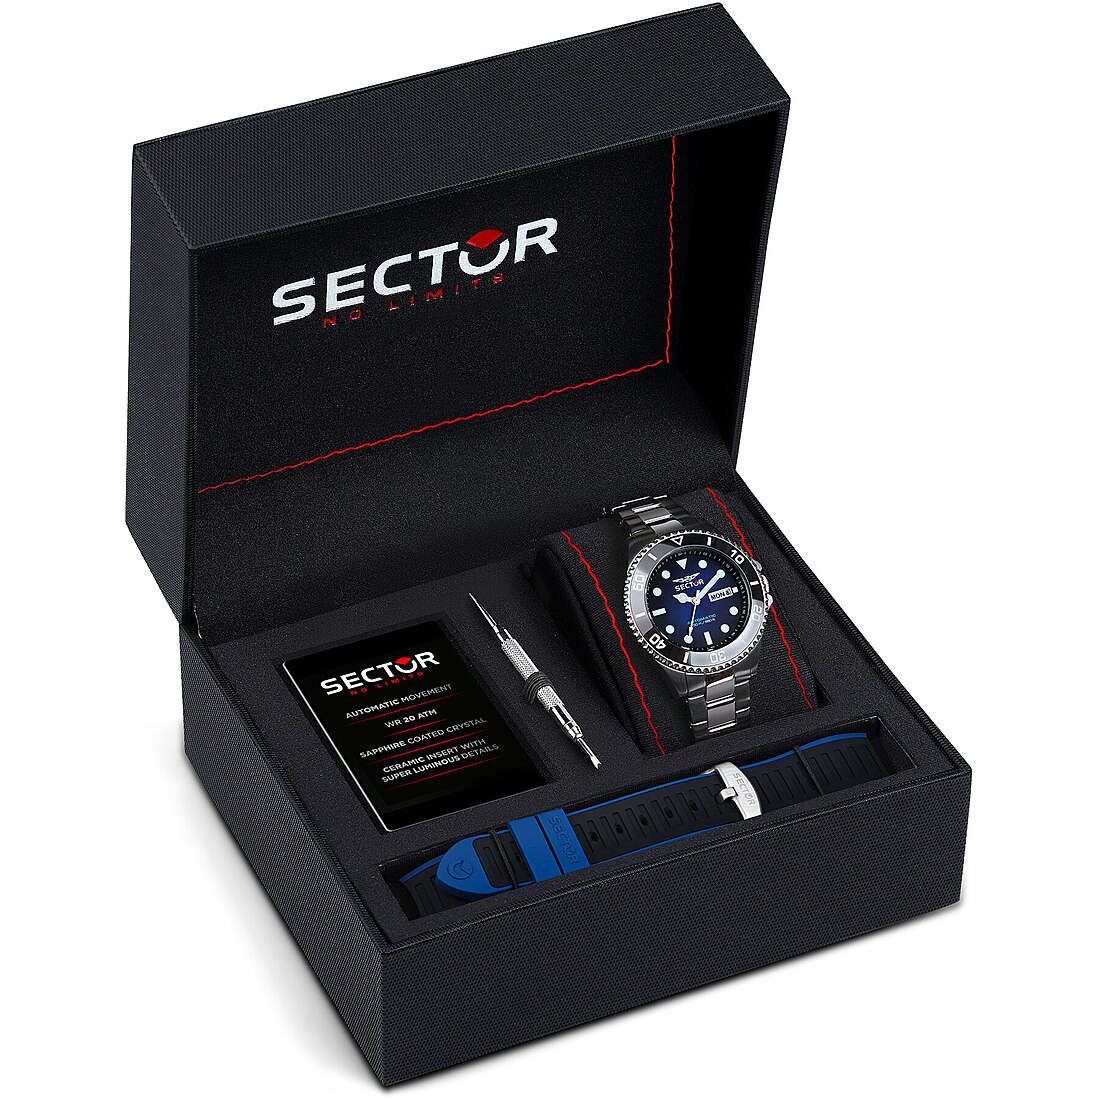 montre multifonction homme Sector 230 R3221161003